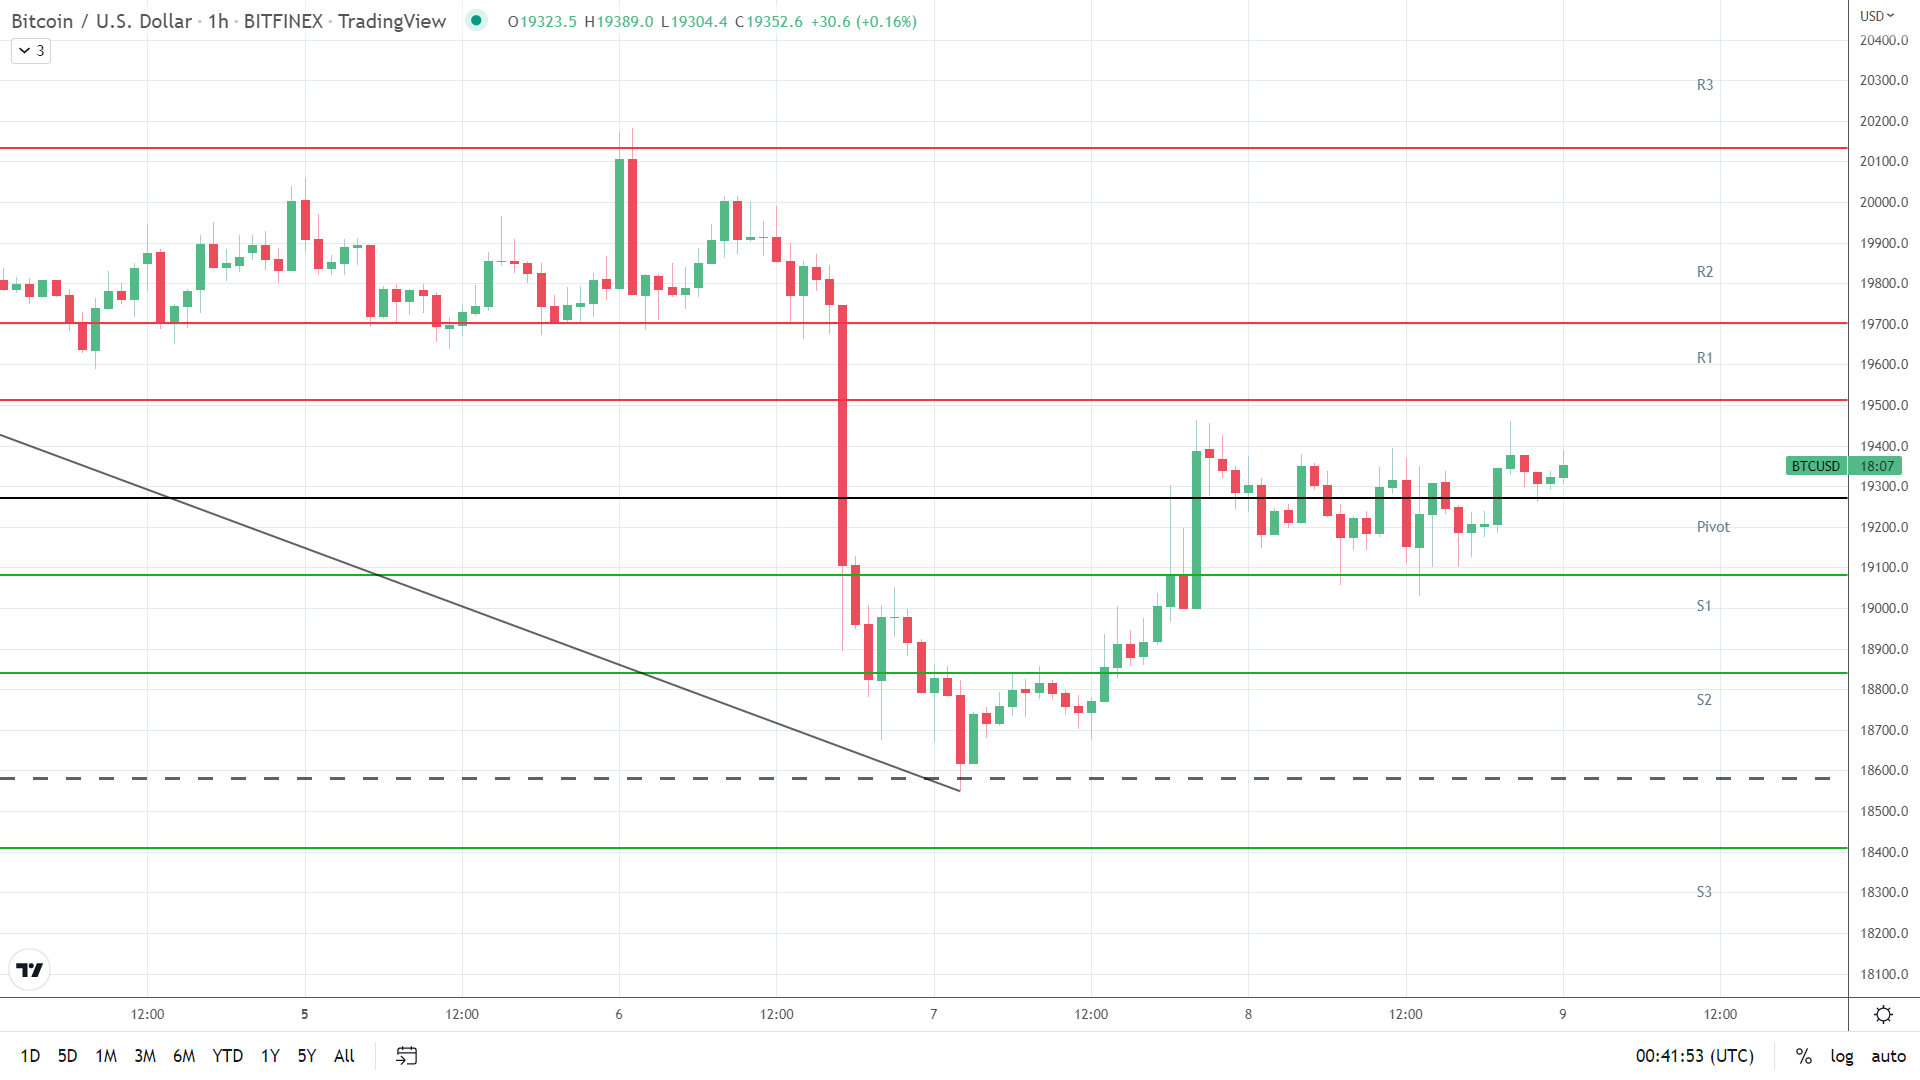 BTC resistance levels in play above the pivot level.